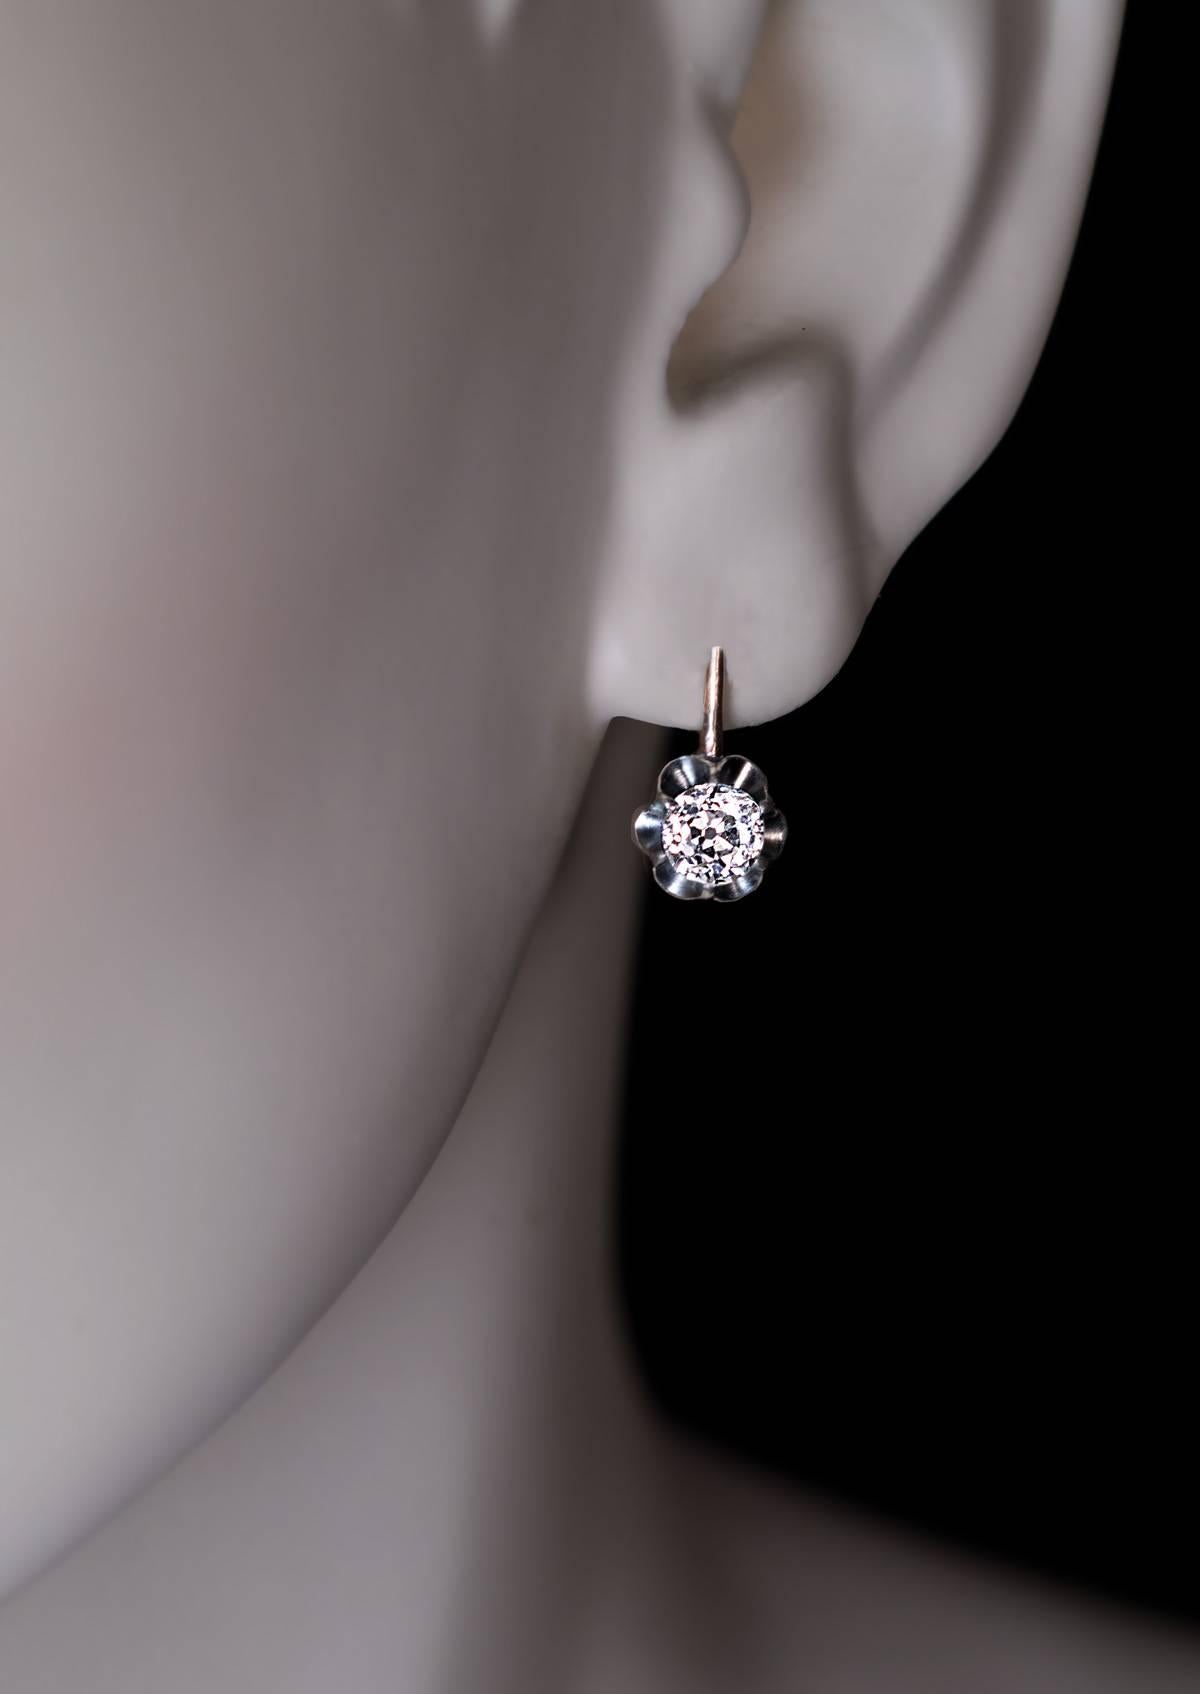 circa 1910
Two sparkling bright white old European cut diamonds (approximately 0.60 ct and 0.62 ct, E-F color, SI1 and SI2 clarity) are set in silver buttercup settings over 14K gold. The earrings are marked with later Russian control marks from the